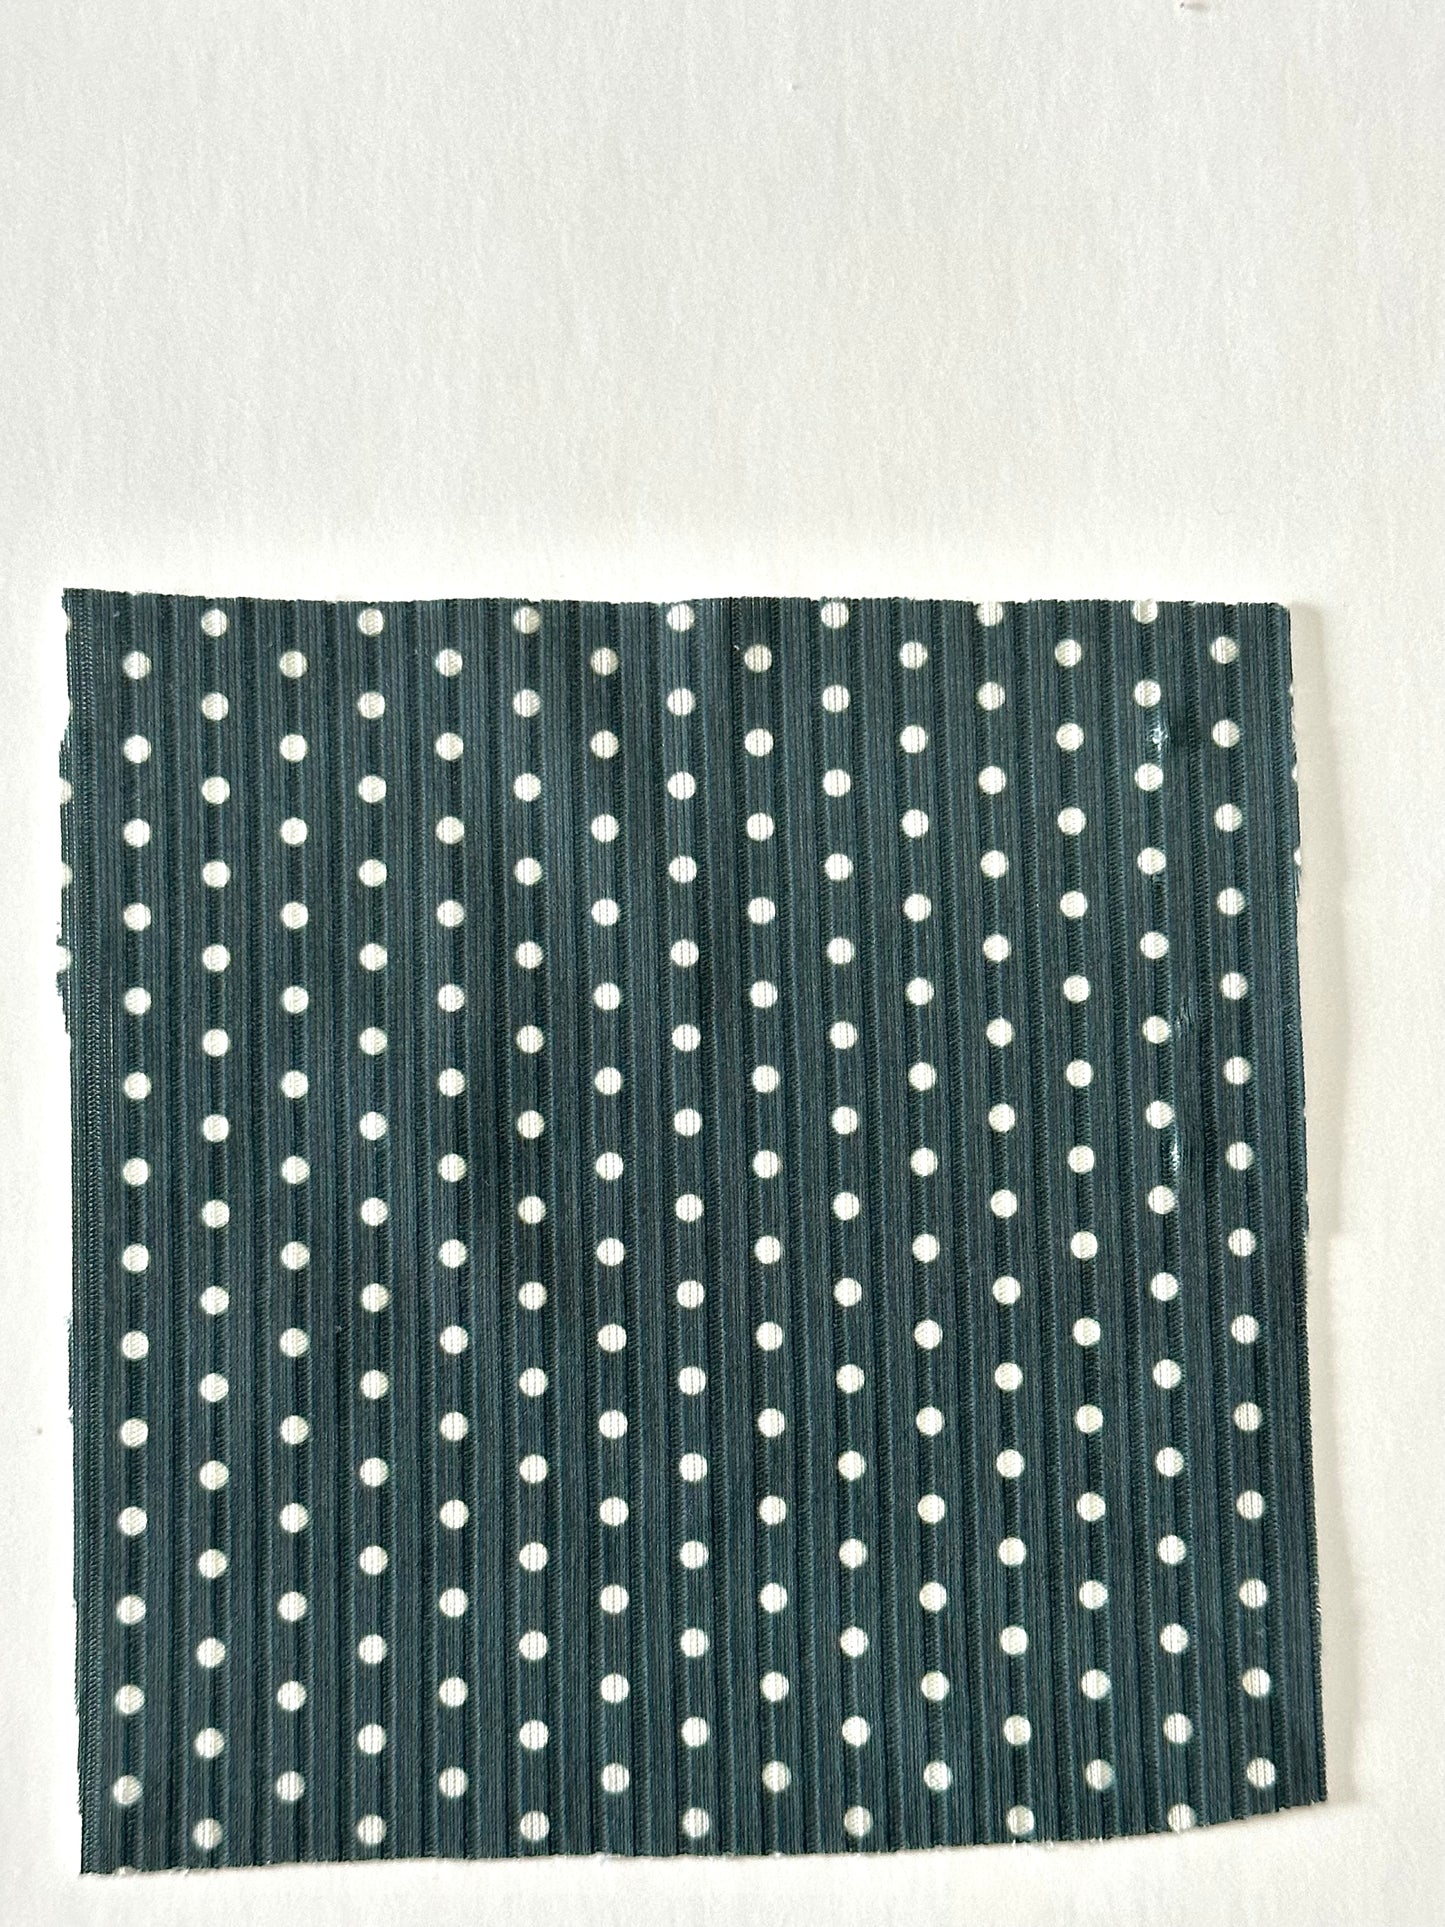 Polka Dots in Dark Green on Unbrushed Rib Knit Fabric Sold by the 1/4 yard